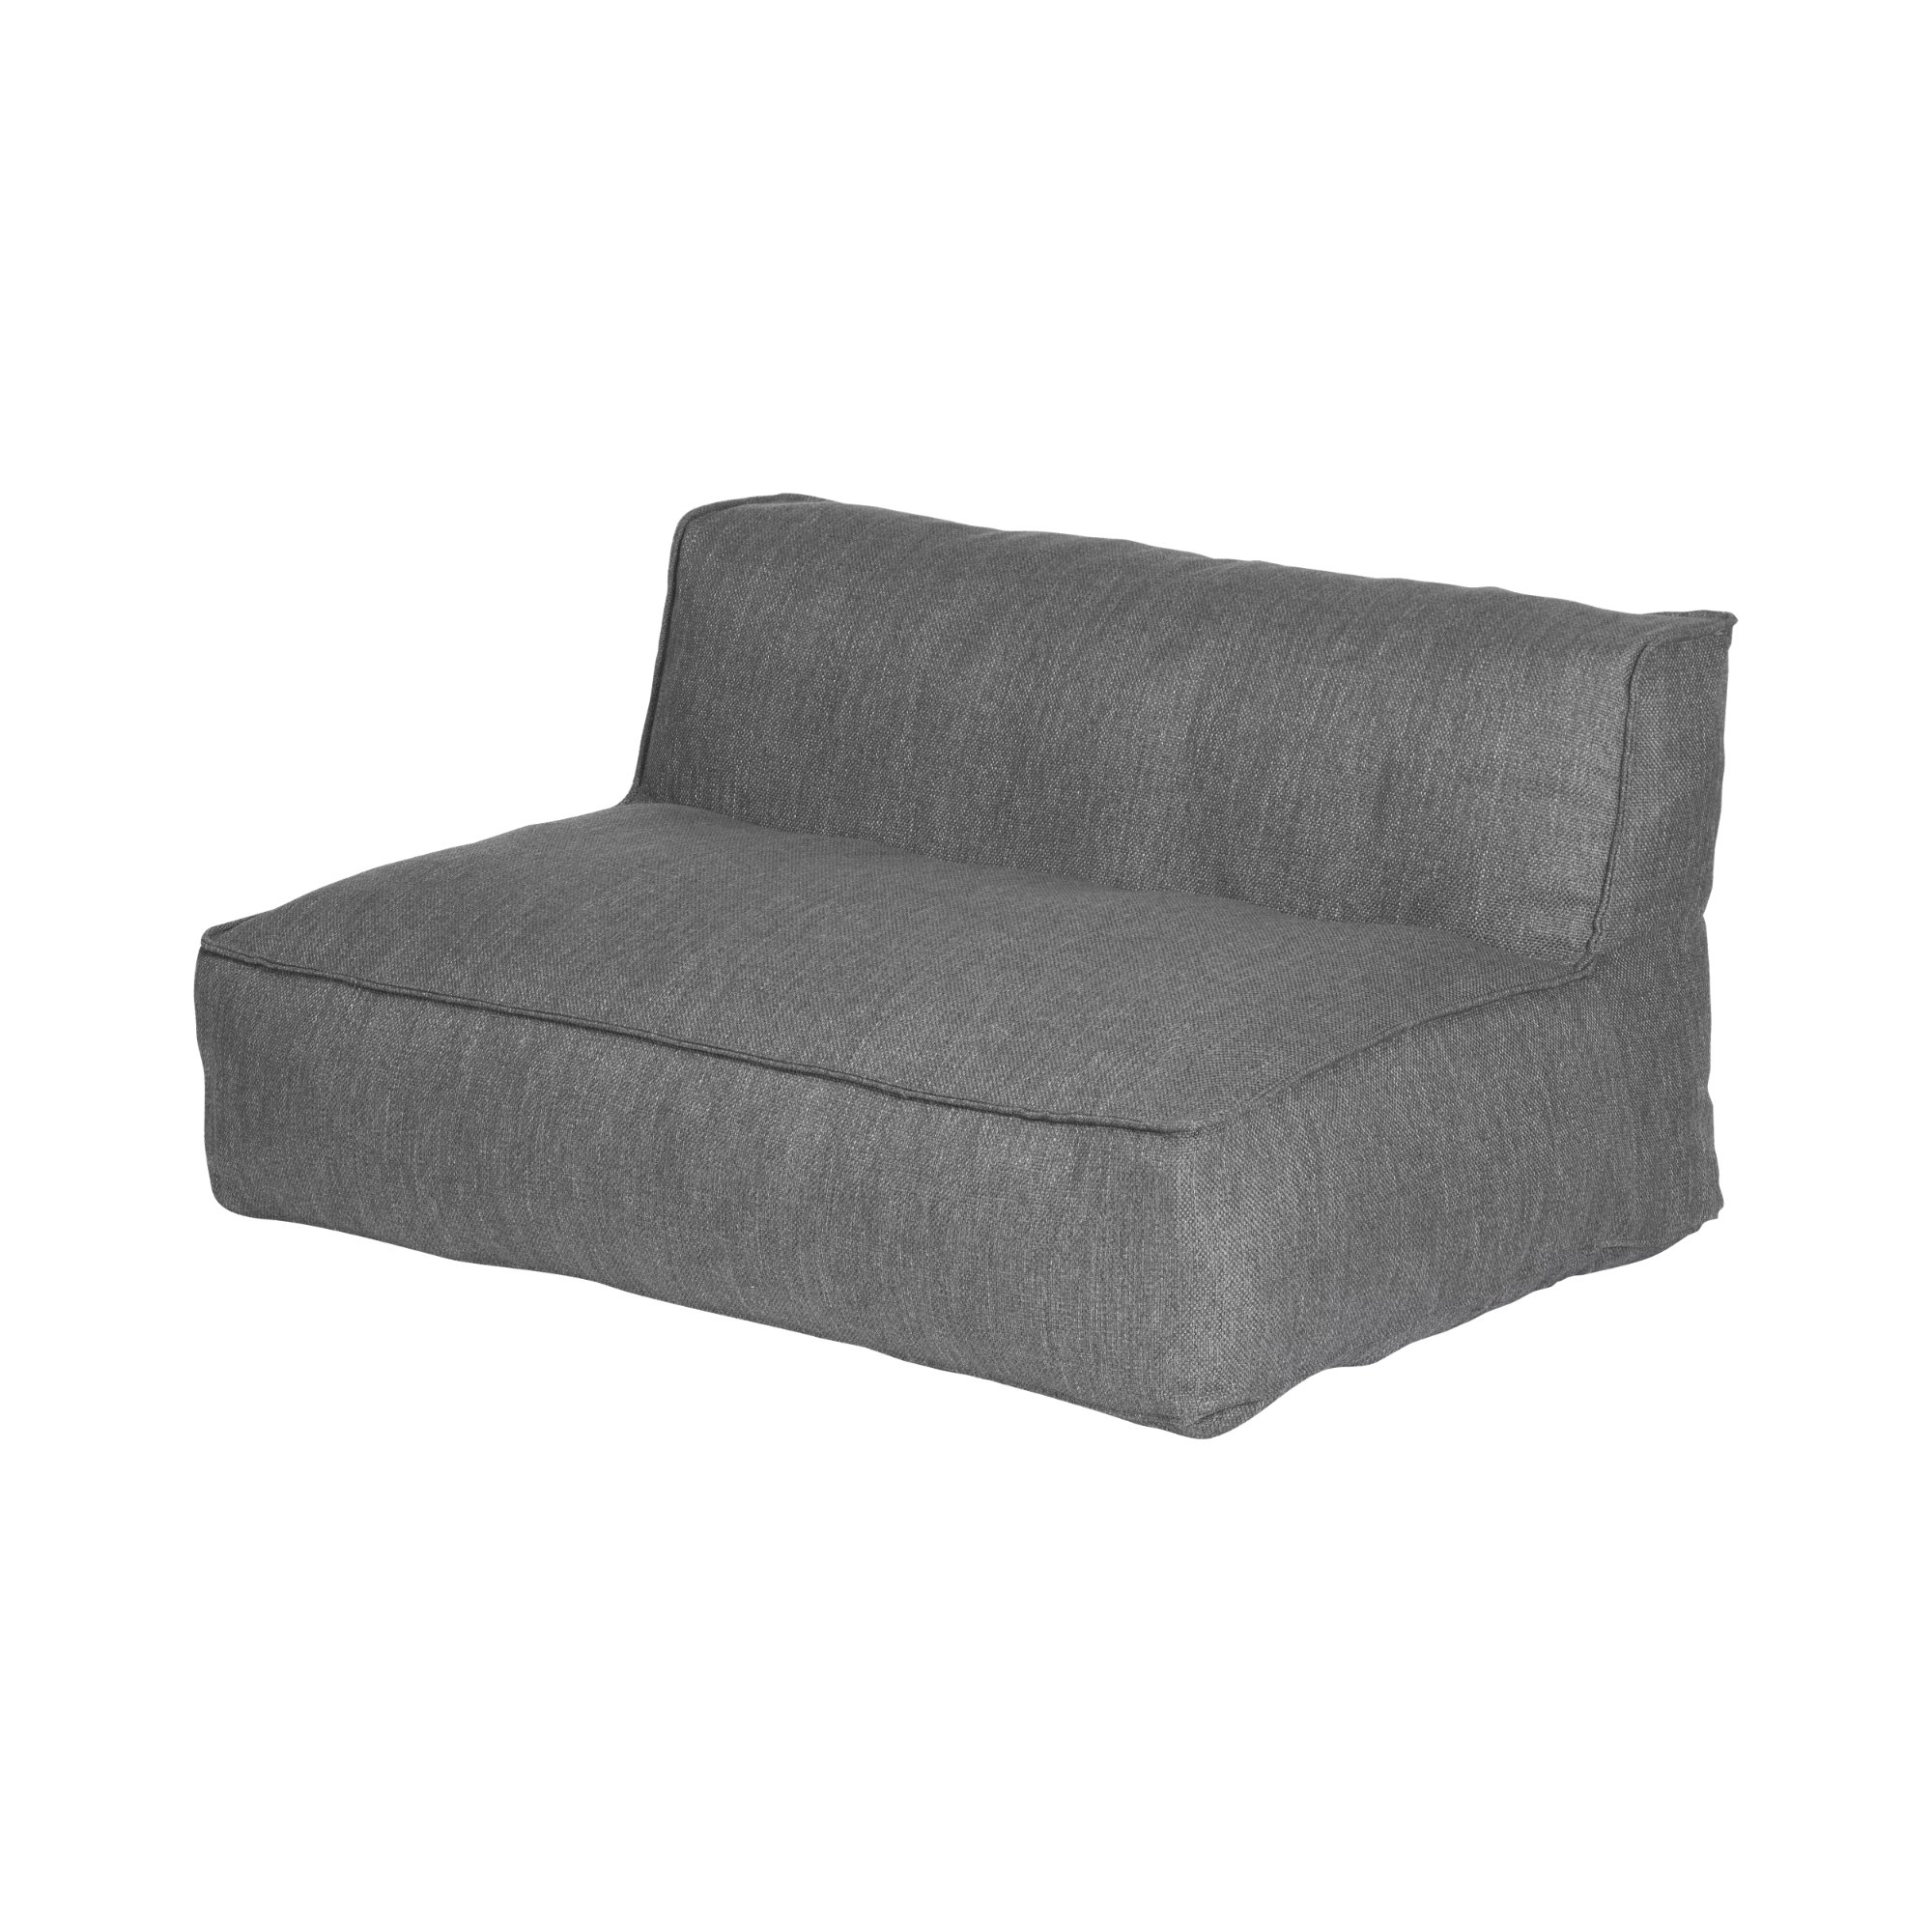 BLOMUS // GROW - OUTDOOR 2-SEATER | CHARCOAL